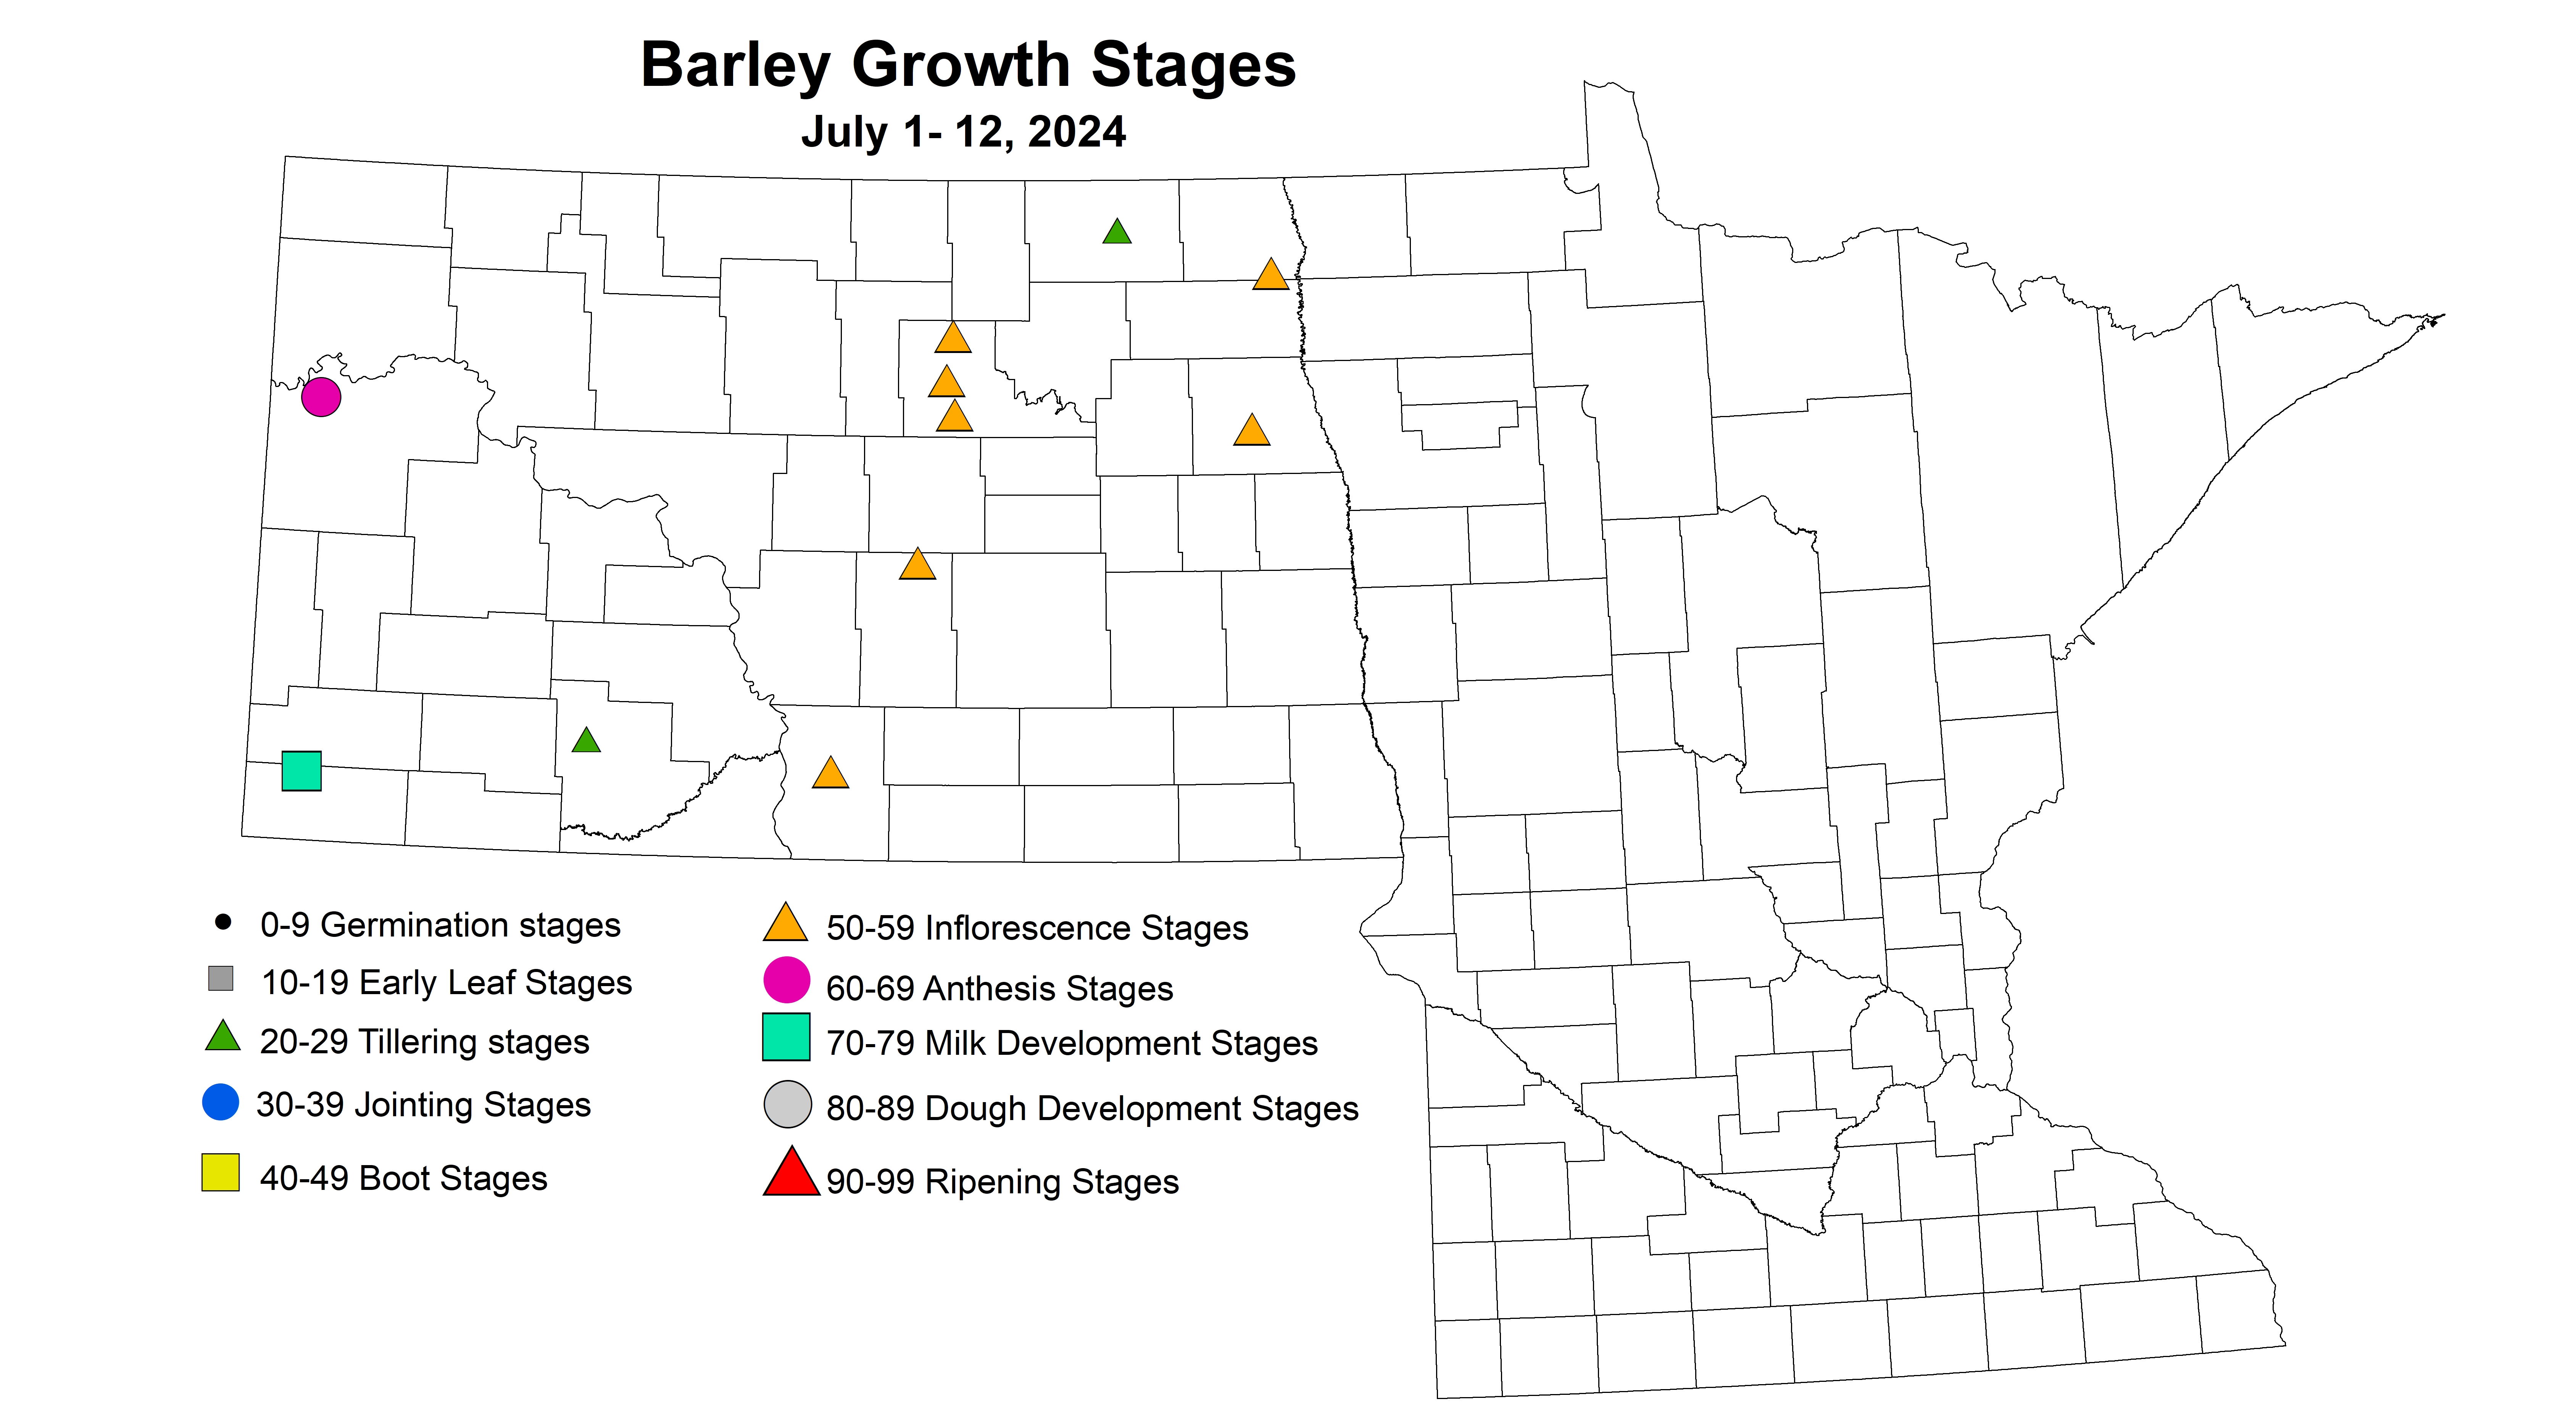 barley growth stages July 1-12 2024